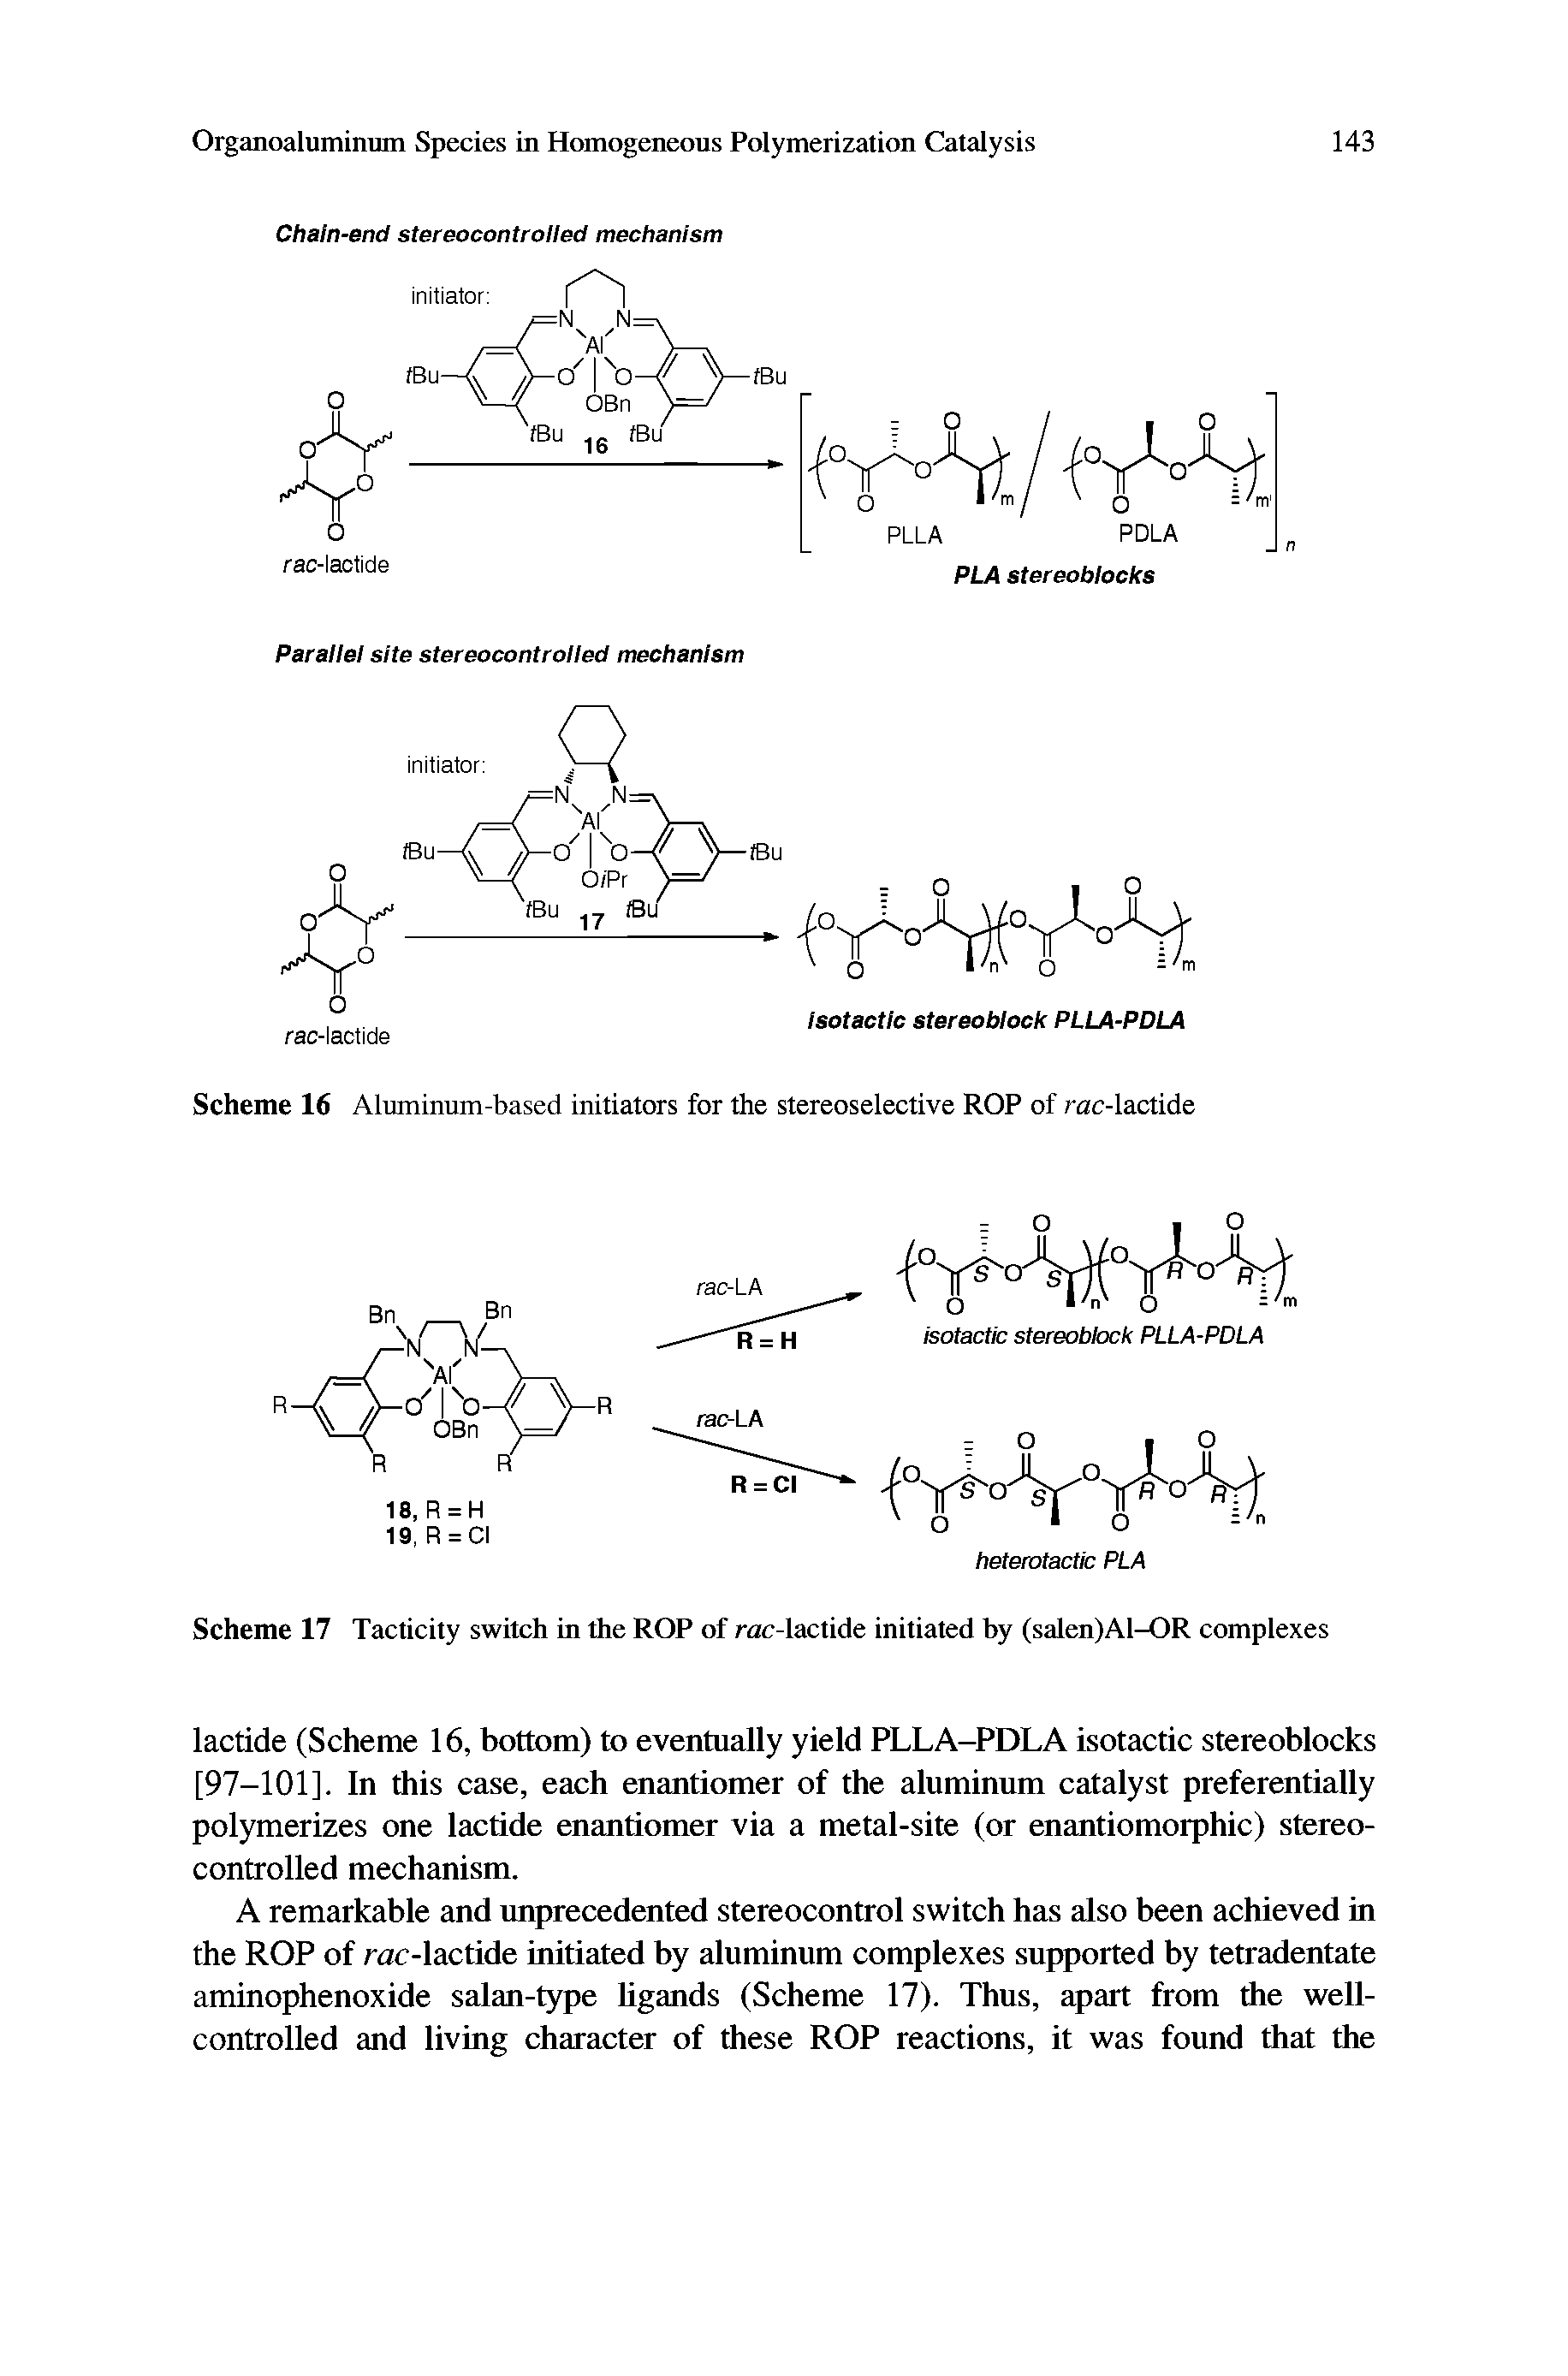 Scheme 16 Aluminum-based initiators for the stereoselective ROP of rac-lactide...